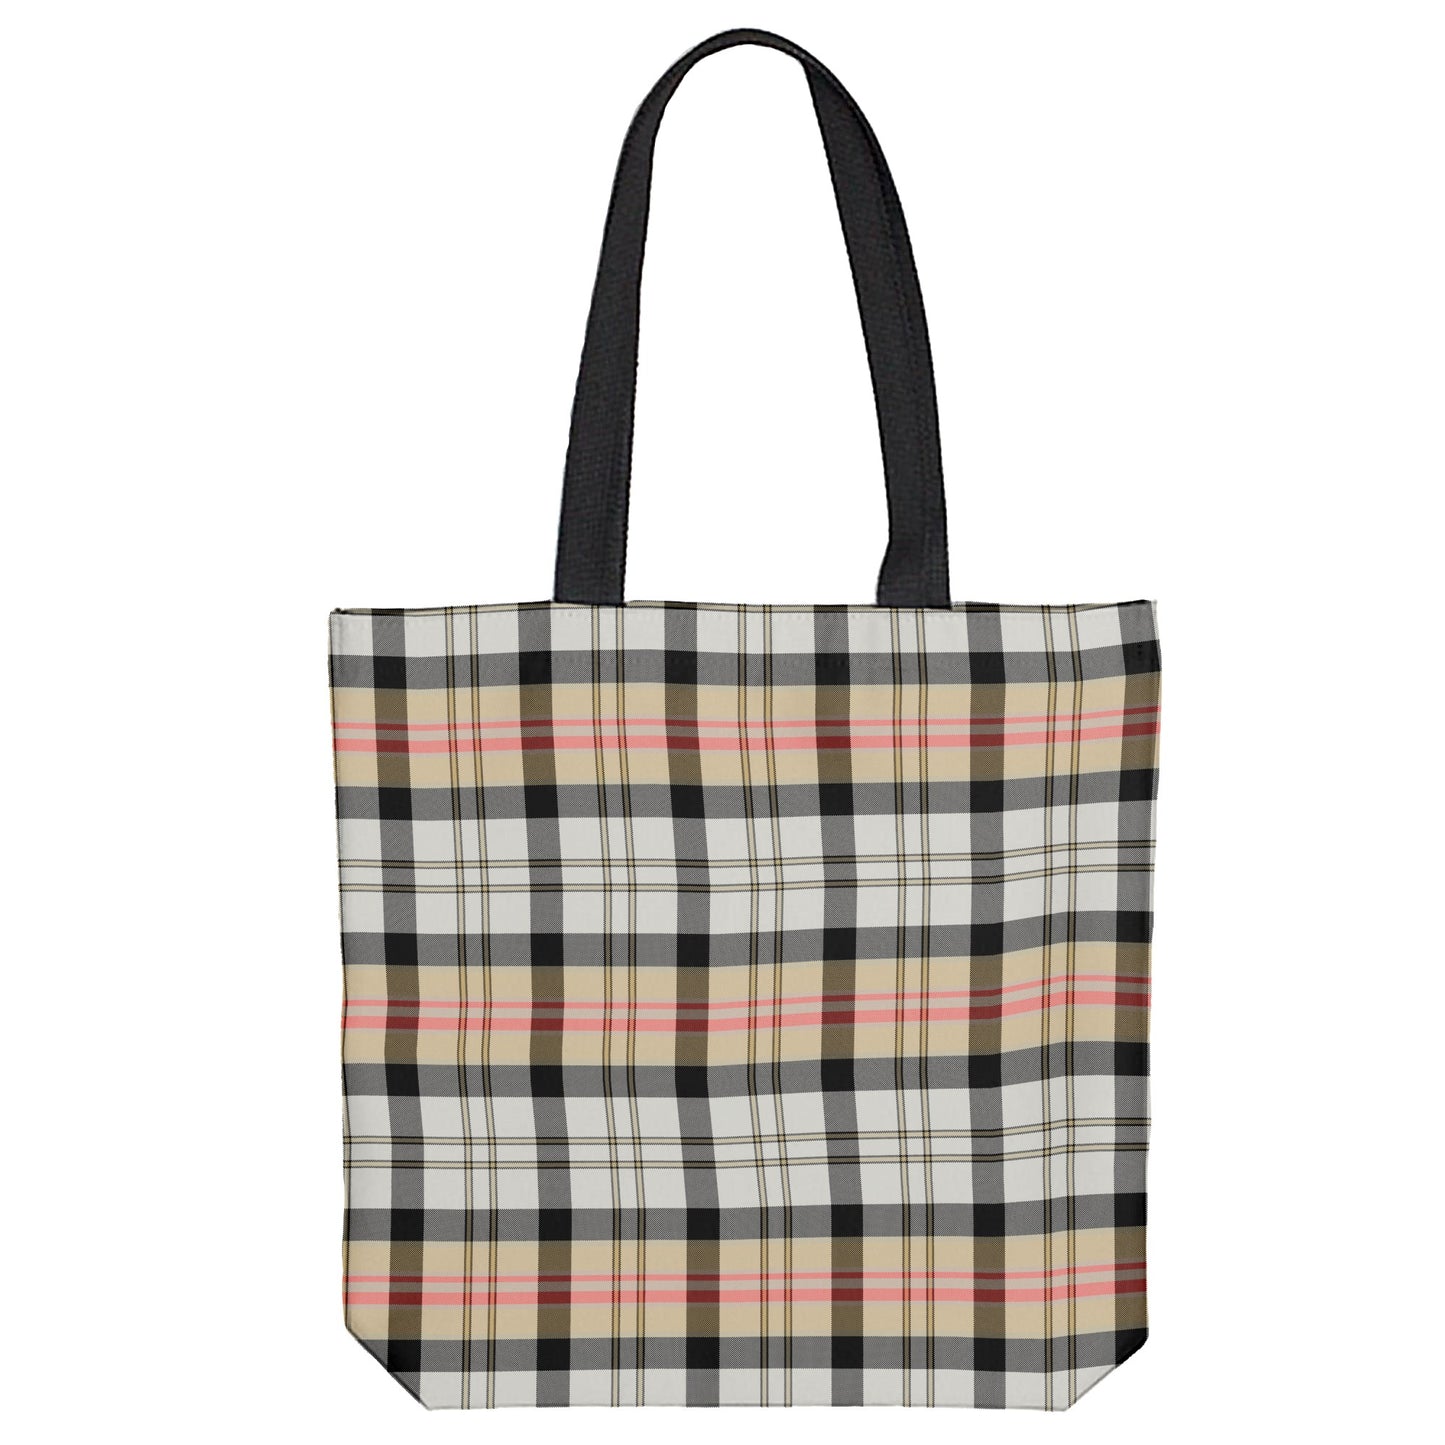 Silver and Gold Plaid Tote Bag- shades and stripes of yellow, gold, cream, red, and black